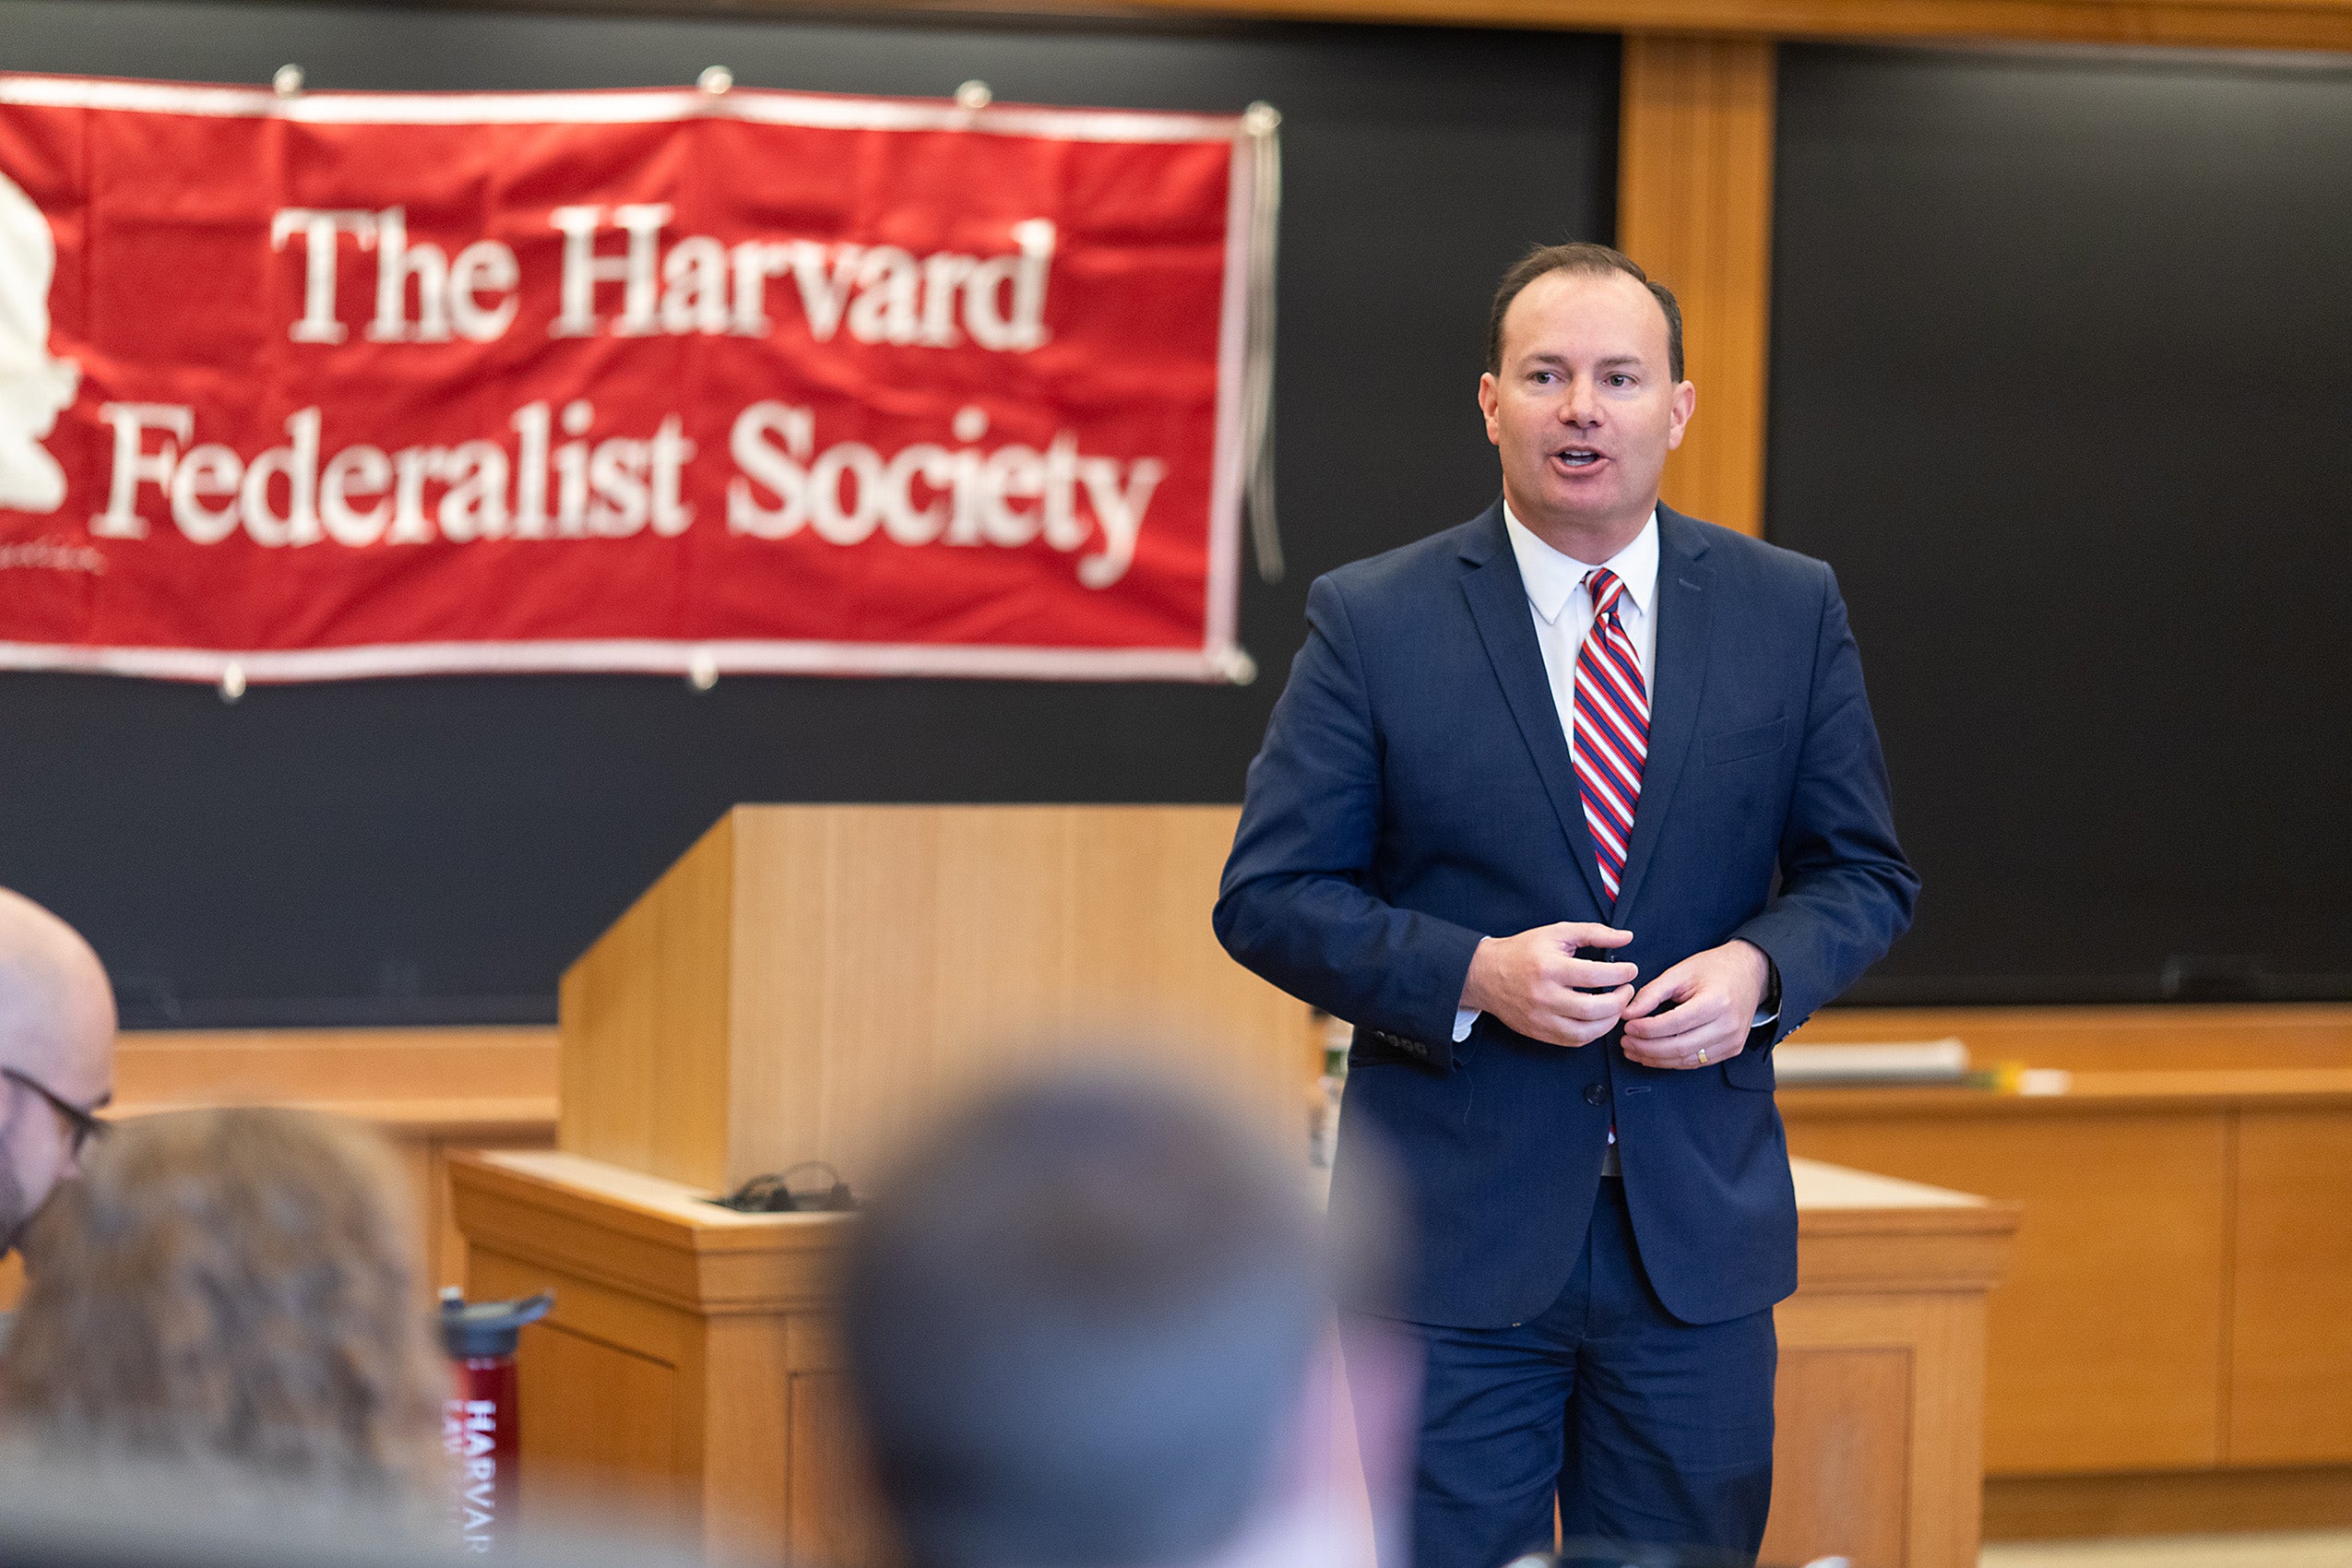 Senator Mike Lee addressing the audience at an event sponsored by the Federalist Society..